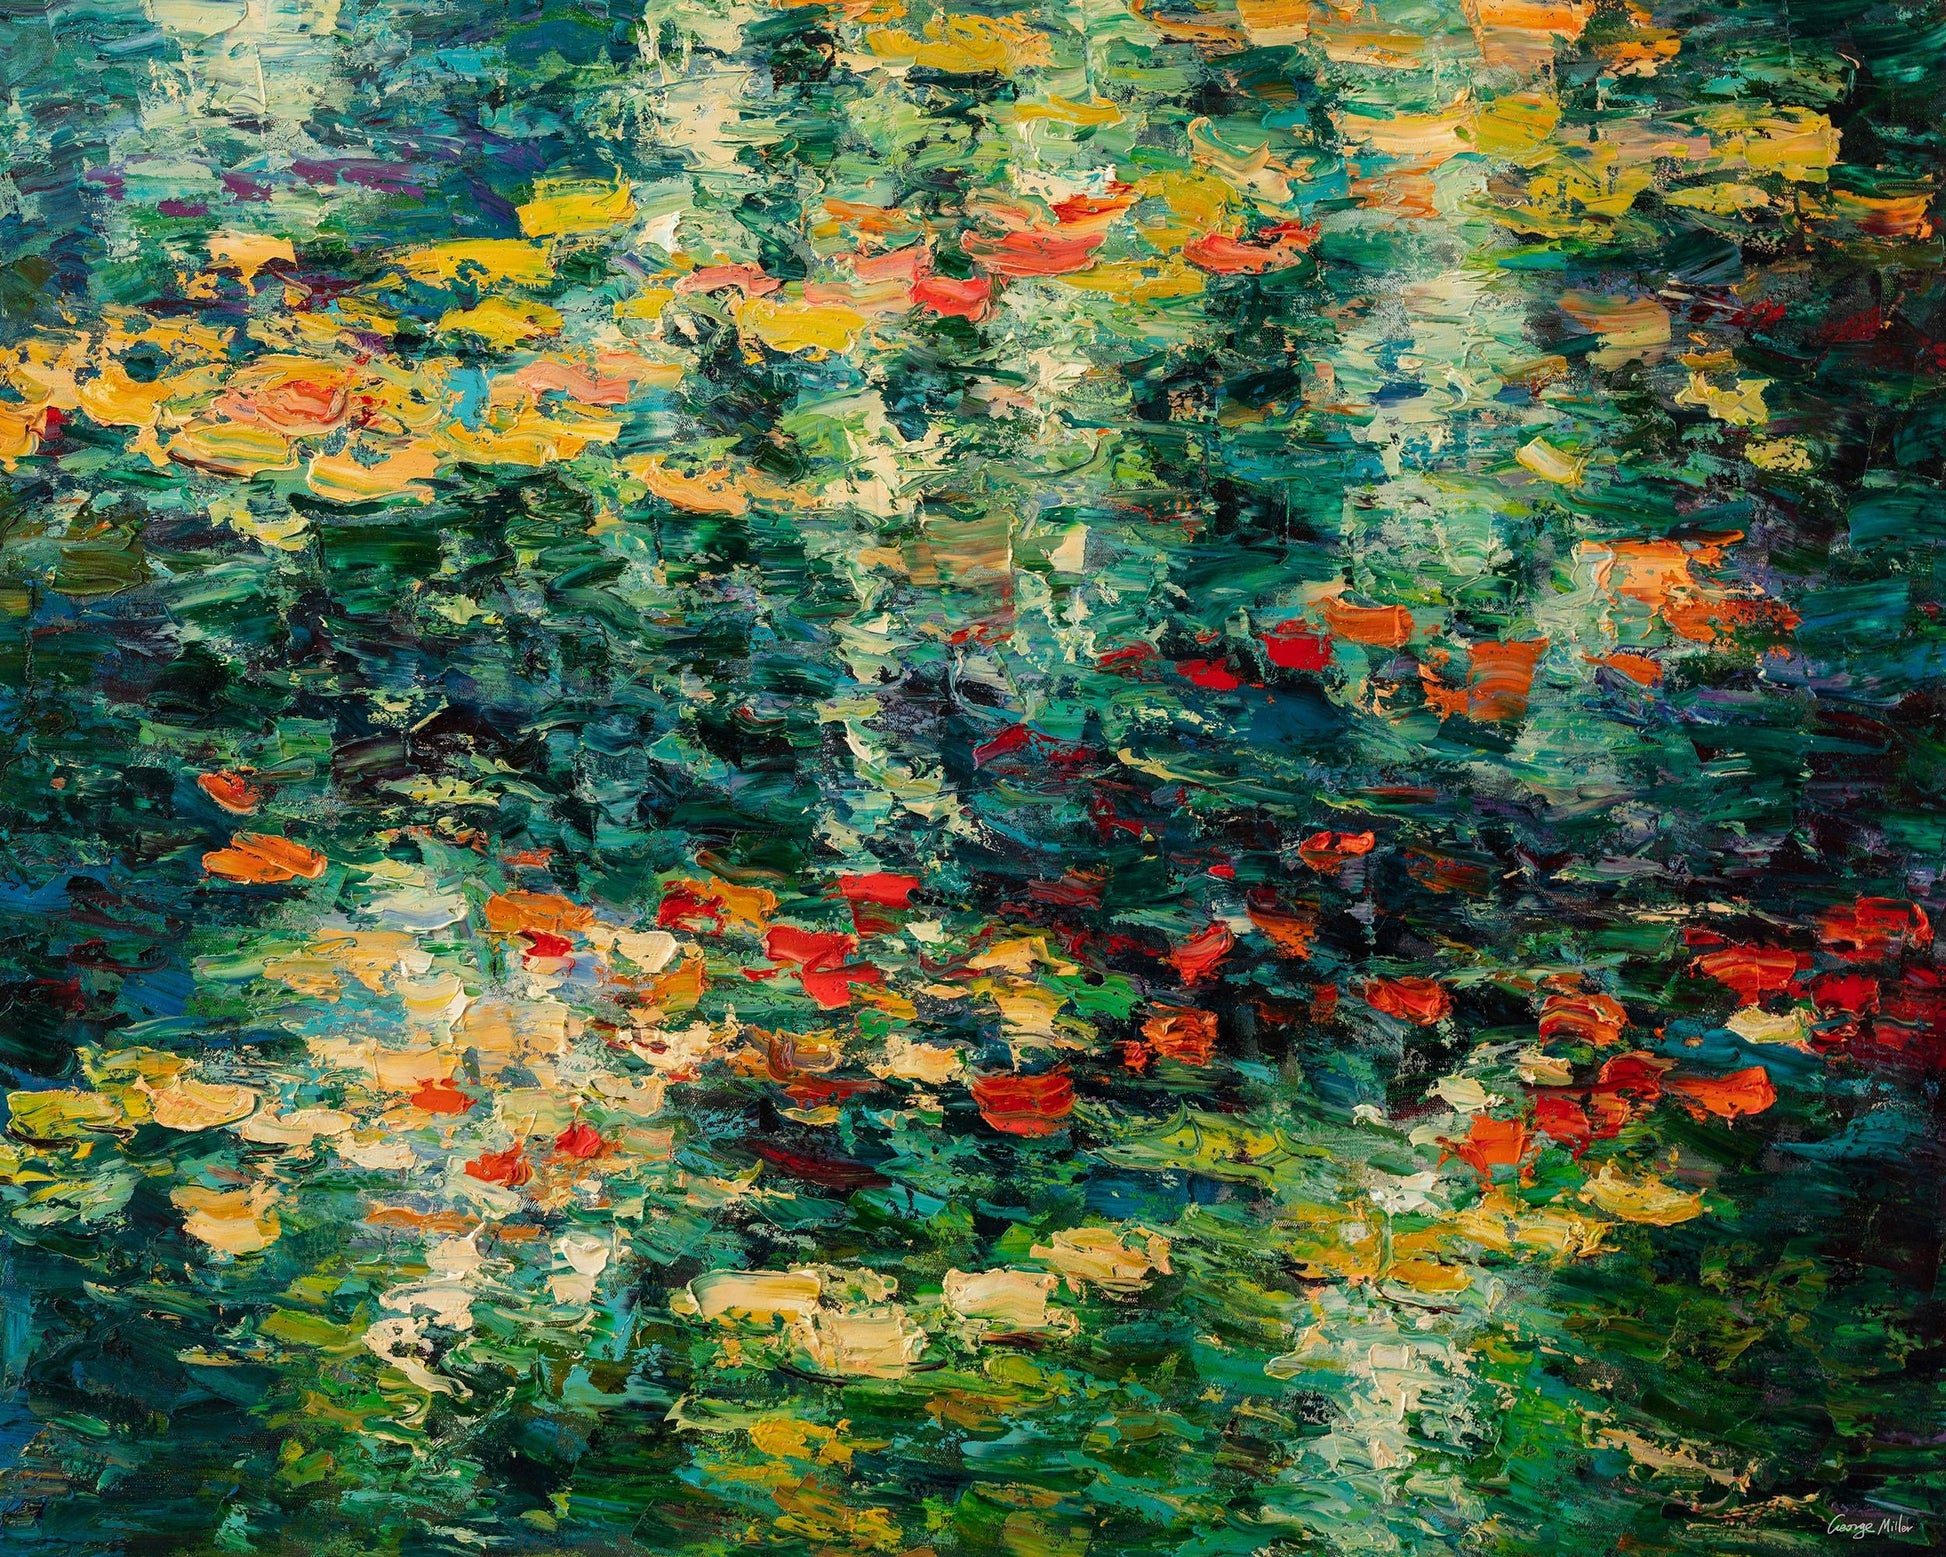 Experience the serenity of nature with Original Oil Painting Pond with Waterlilies by George Miller